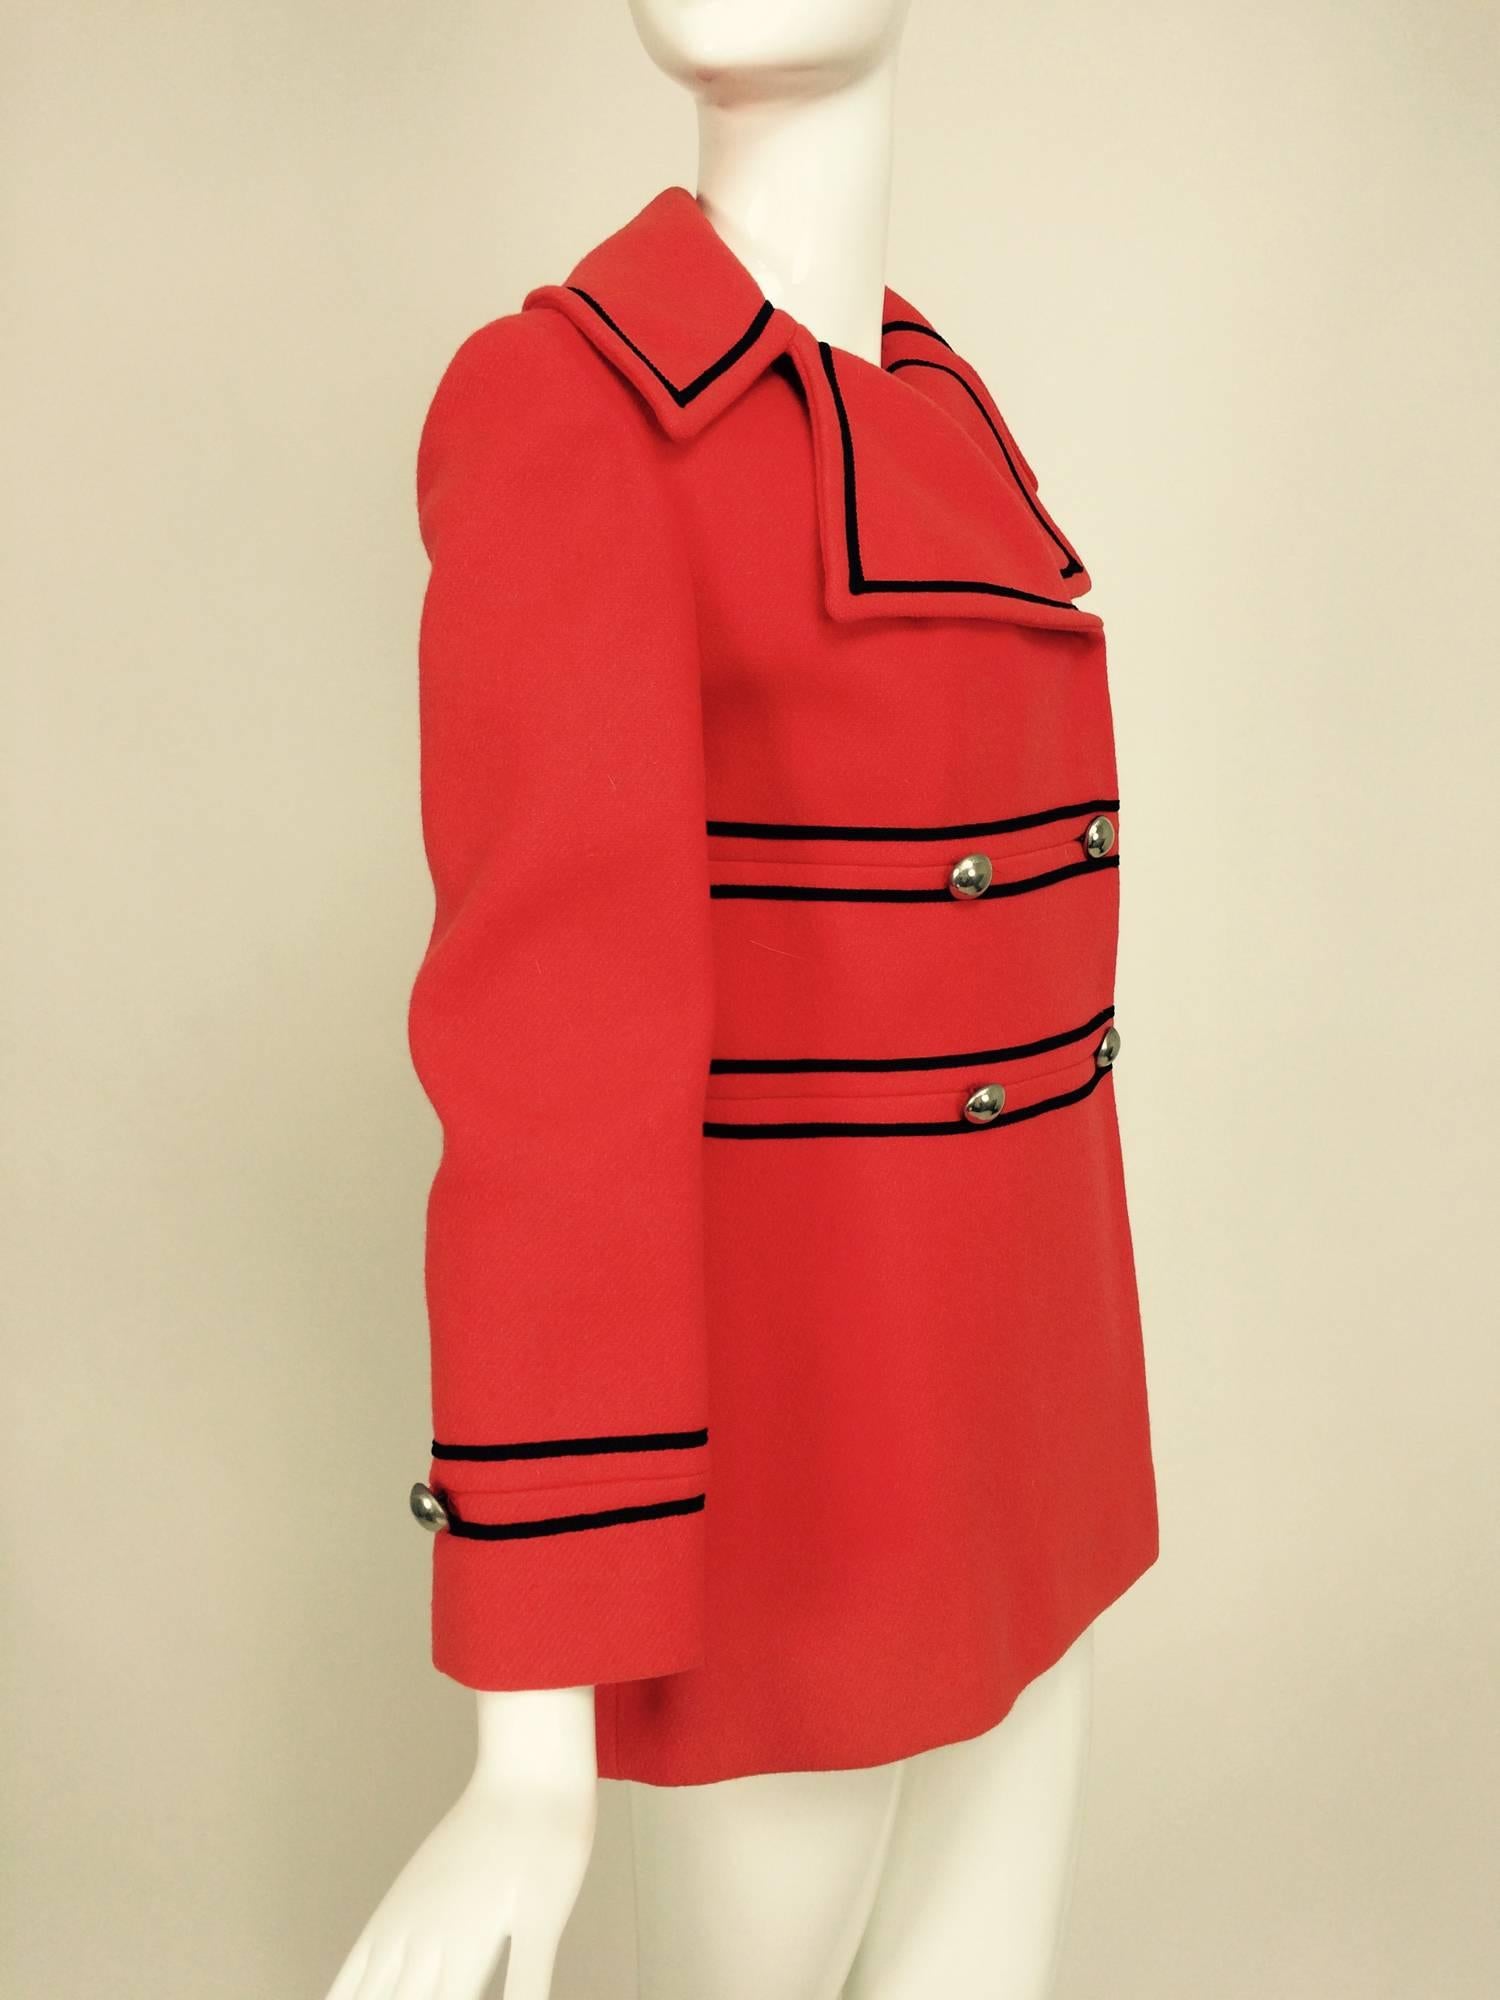 Tomato red wool military style pea coat Junior Gallery 1960s...Double breasted jacket with wide notched collar...Silver dome buttons and black cord trim...Fitted and flares just below the hip...Hidden covered snaps at the front....Fully lined in